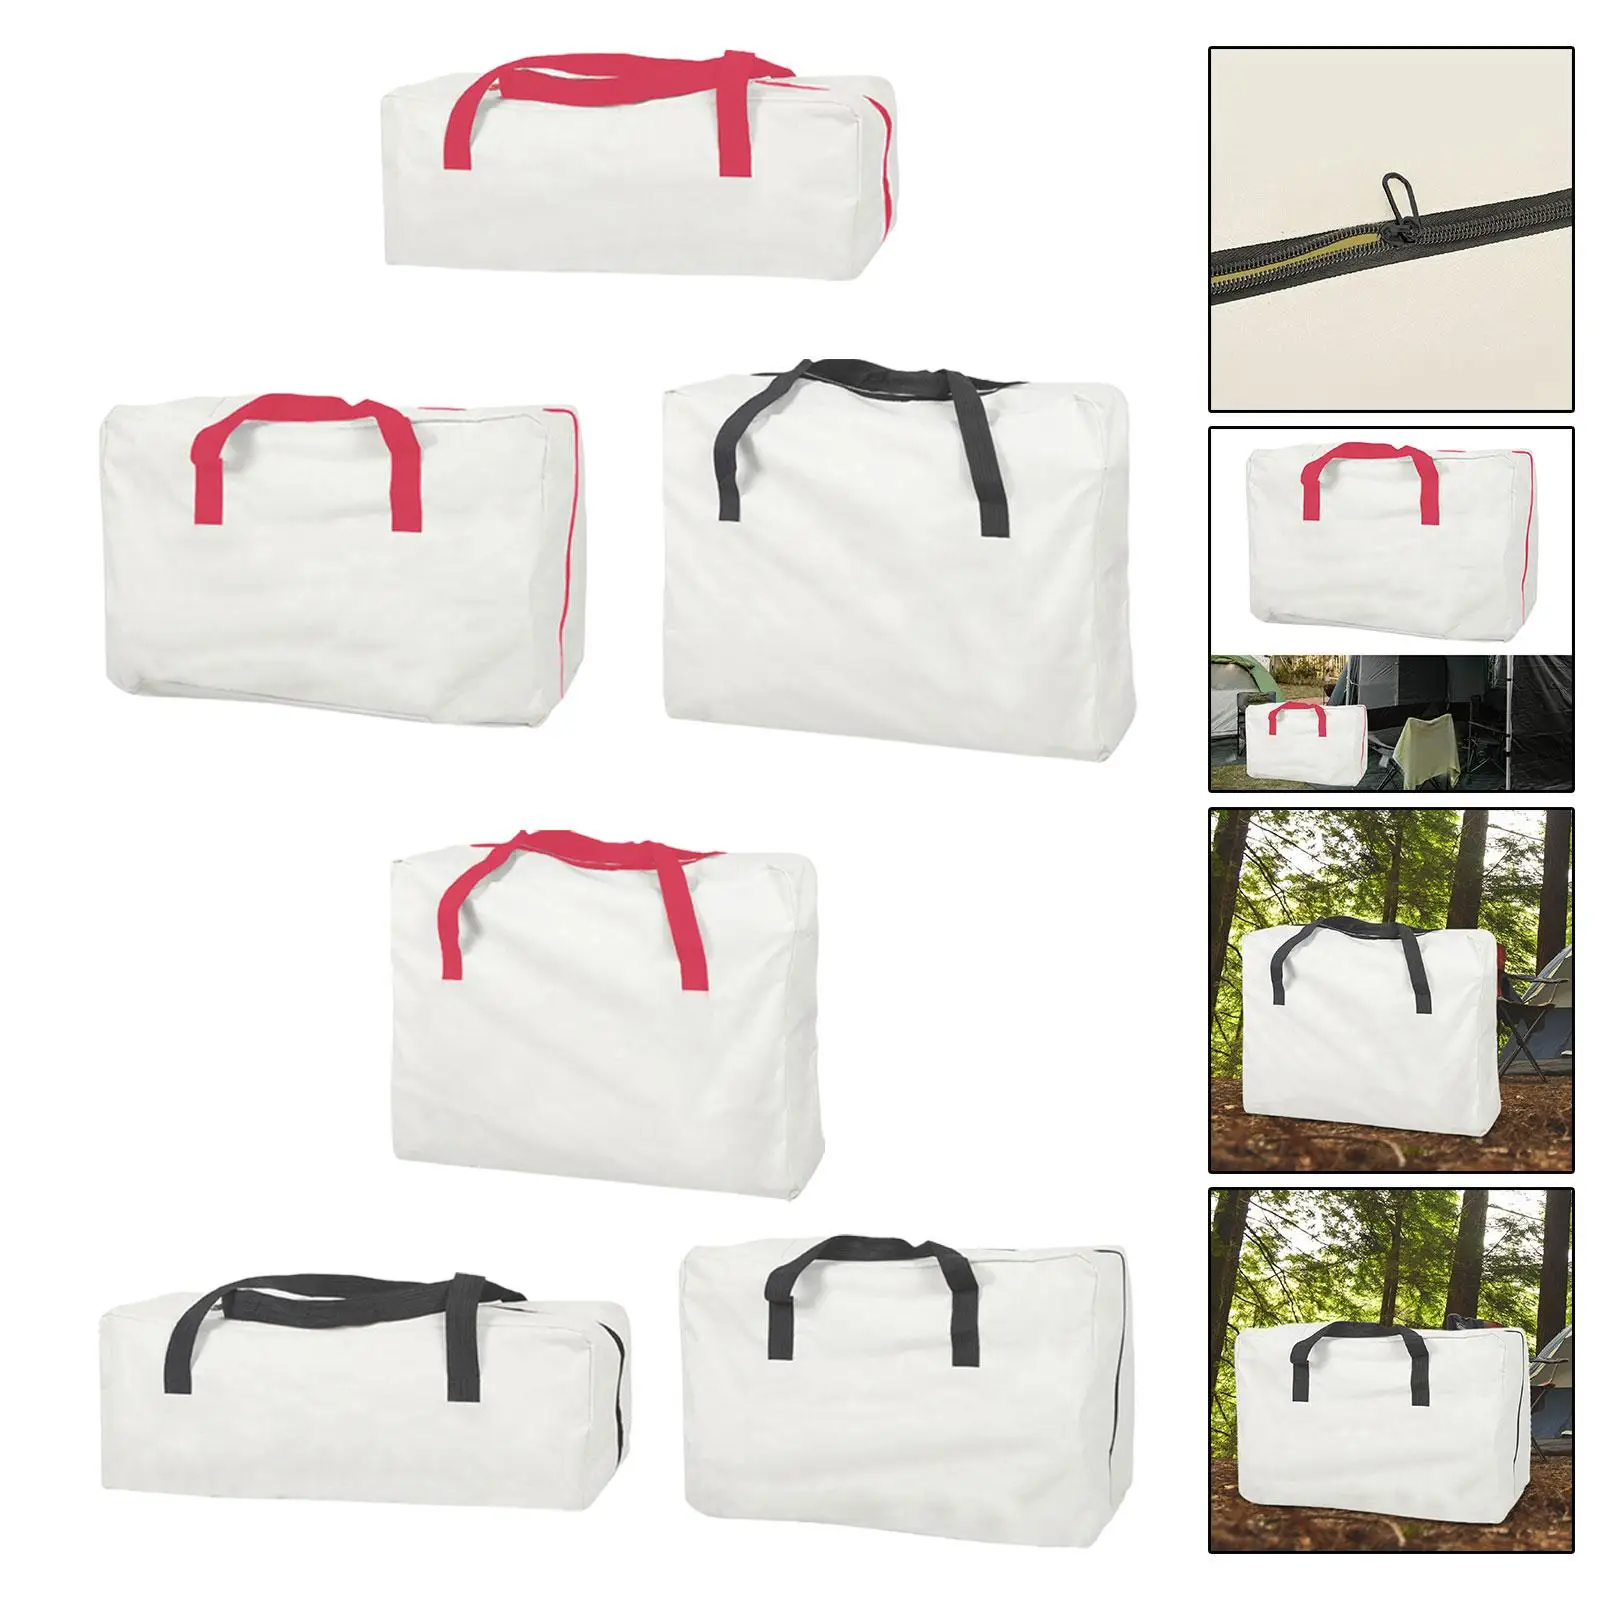 Tent Pole Storage Bag Pouch Zipper Closure Water Resistant Camping Storage Bag